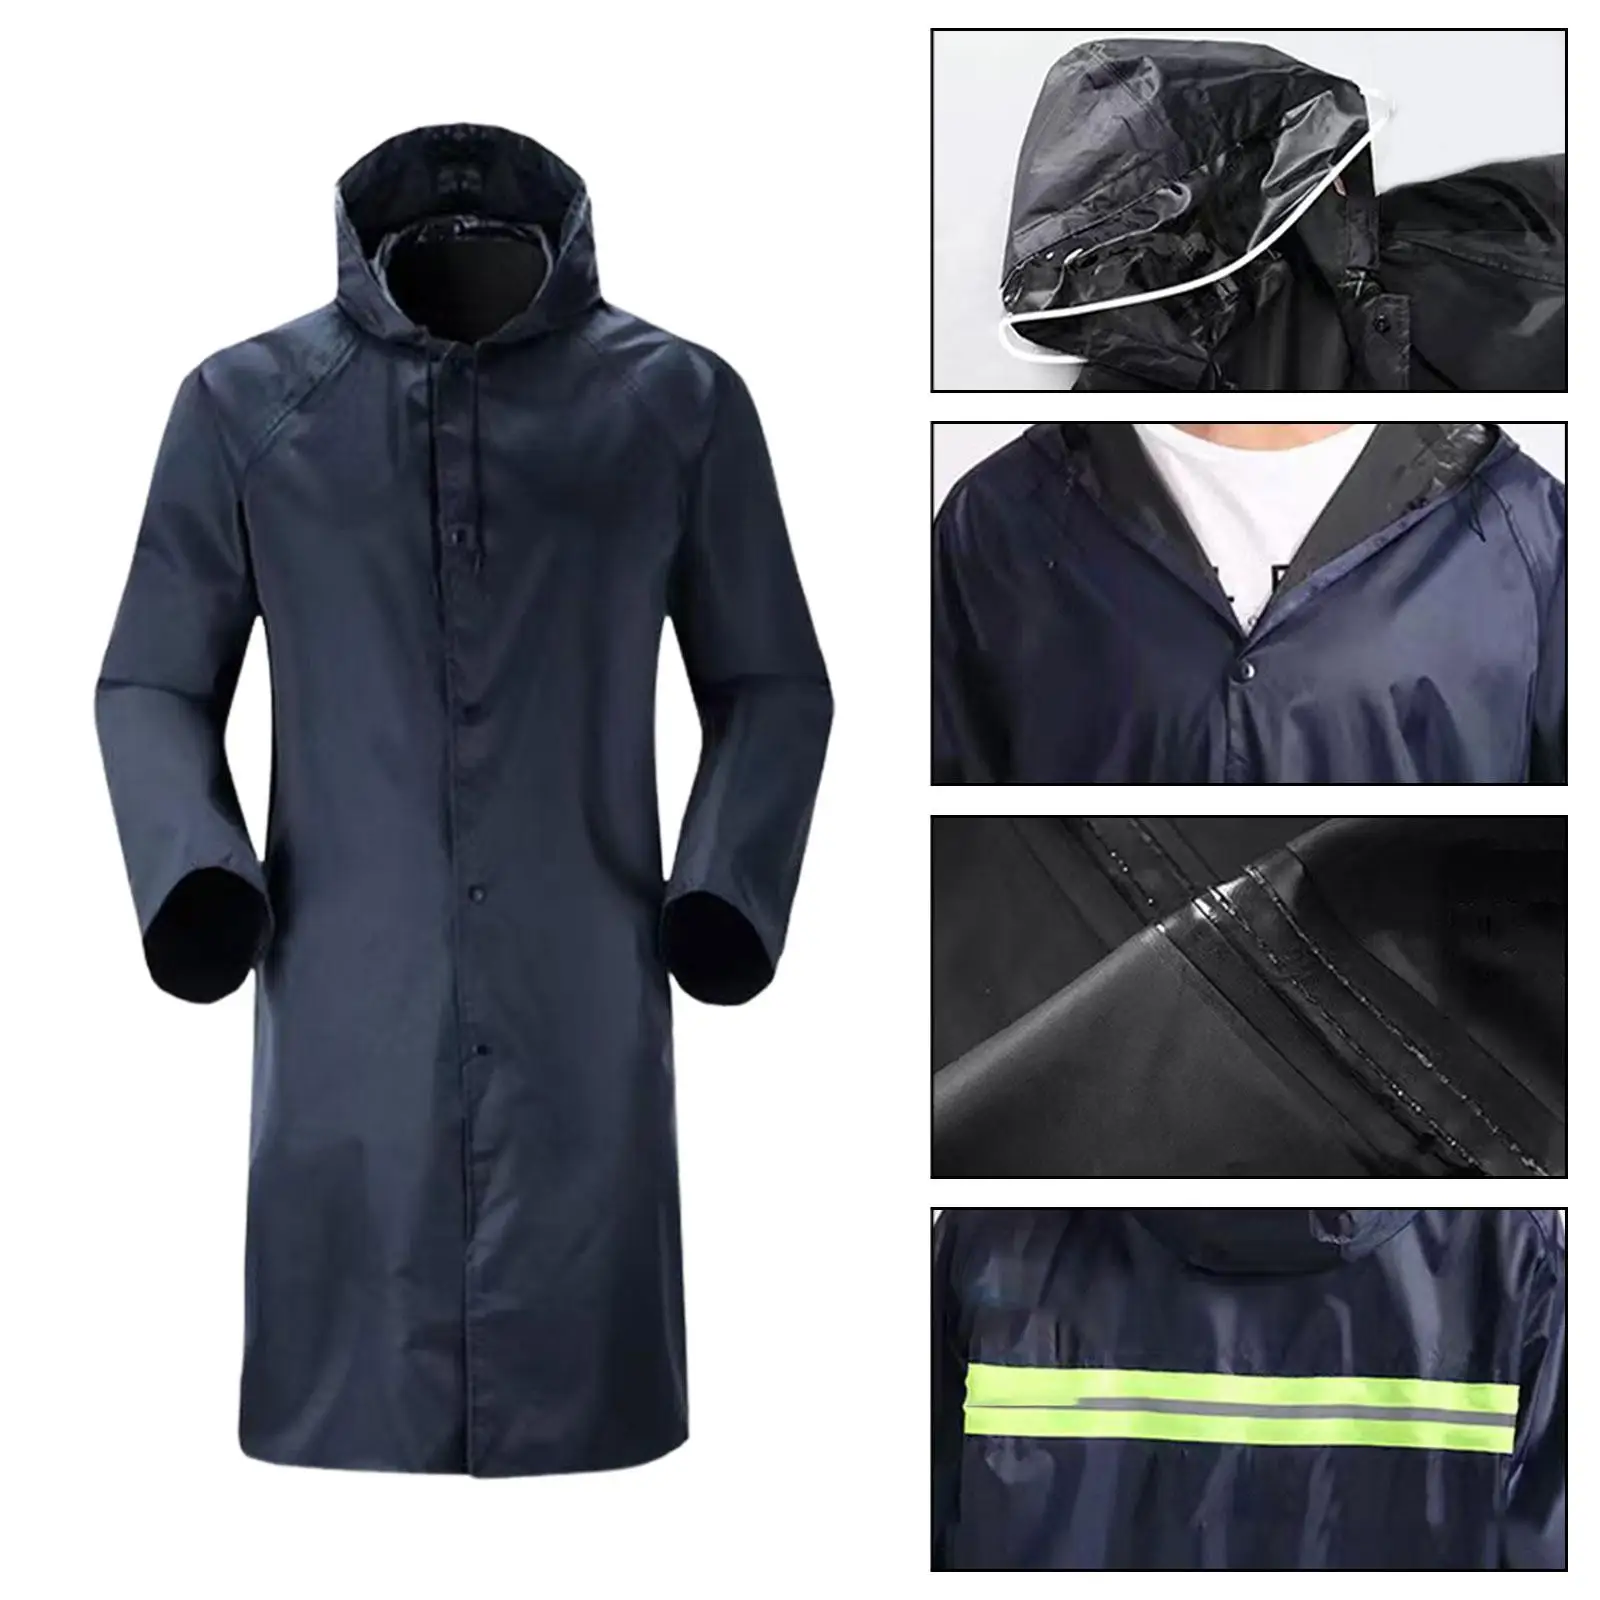 Rain Jacket Work Clothing Overalls with Fluorescent Strips Rain Coat for Unisex Cycling Outdoor Activities Motorcycle Travel